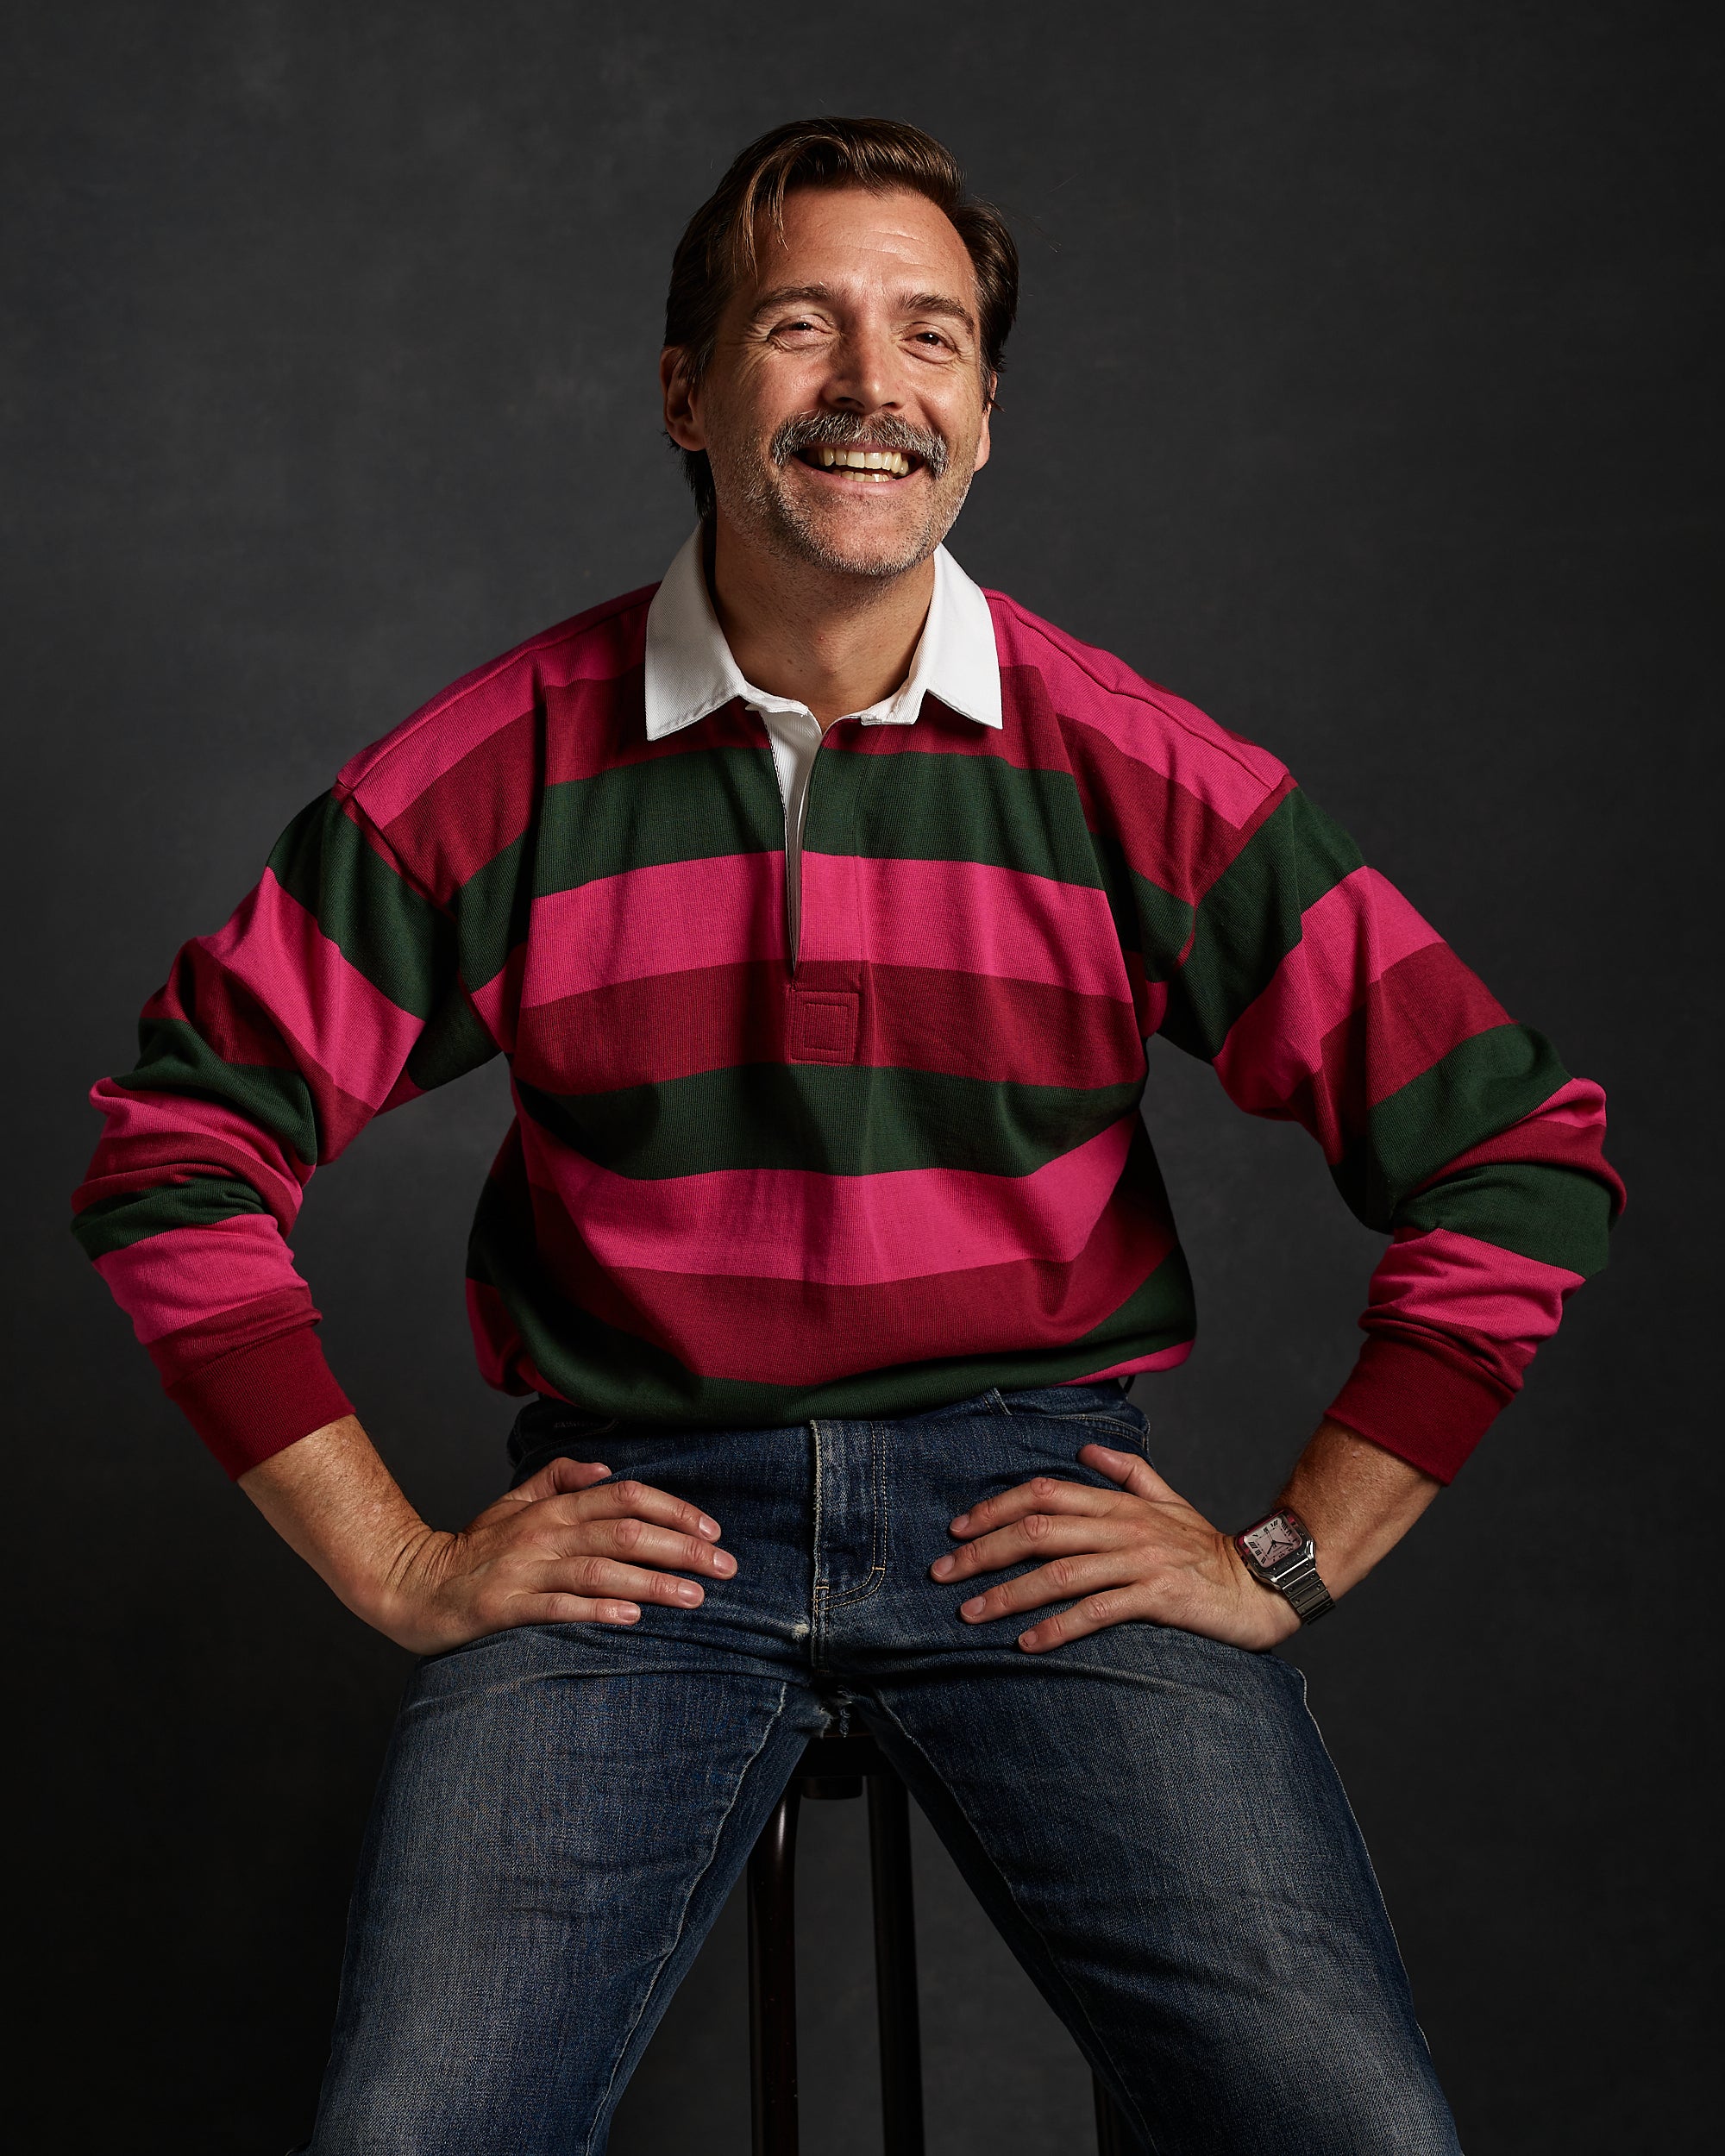 Image of Community Clothing Founder Patrick Grant sat on a stool wearing a pink and green striped rugby shirt.